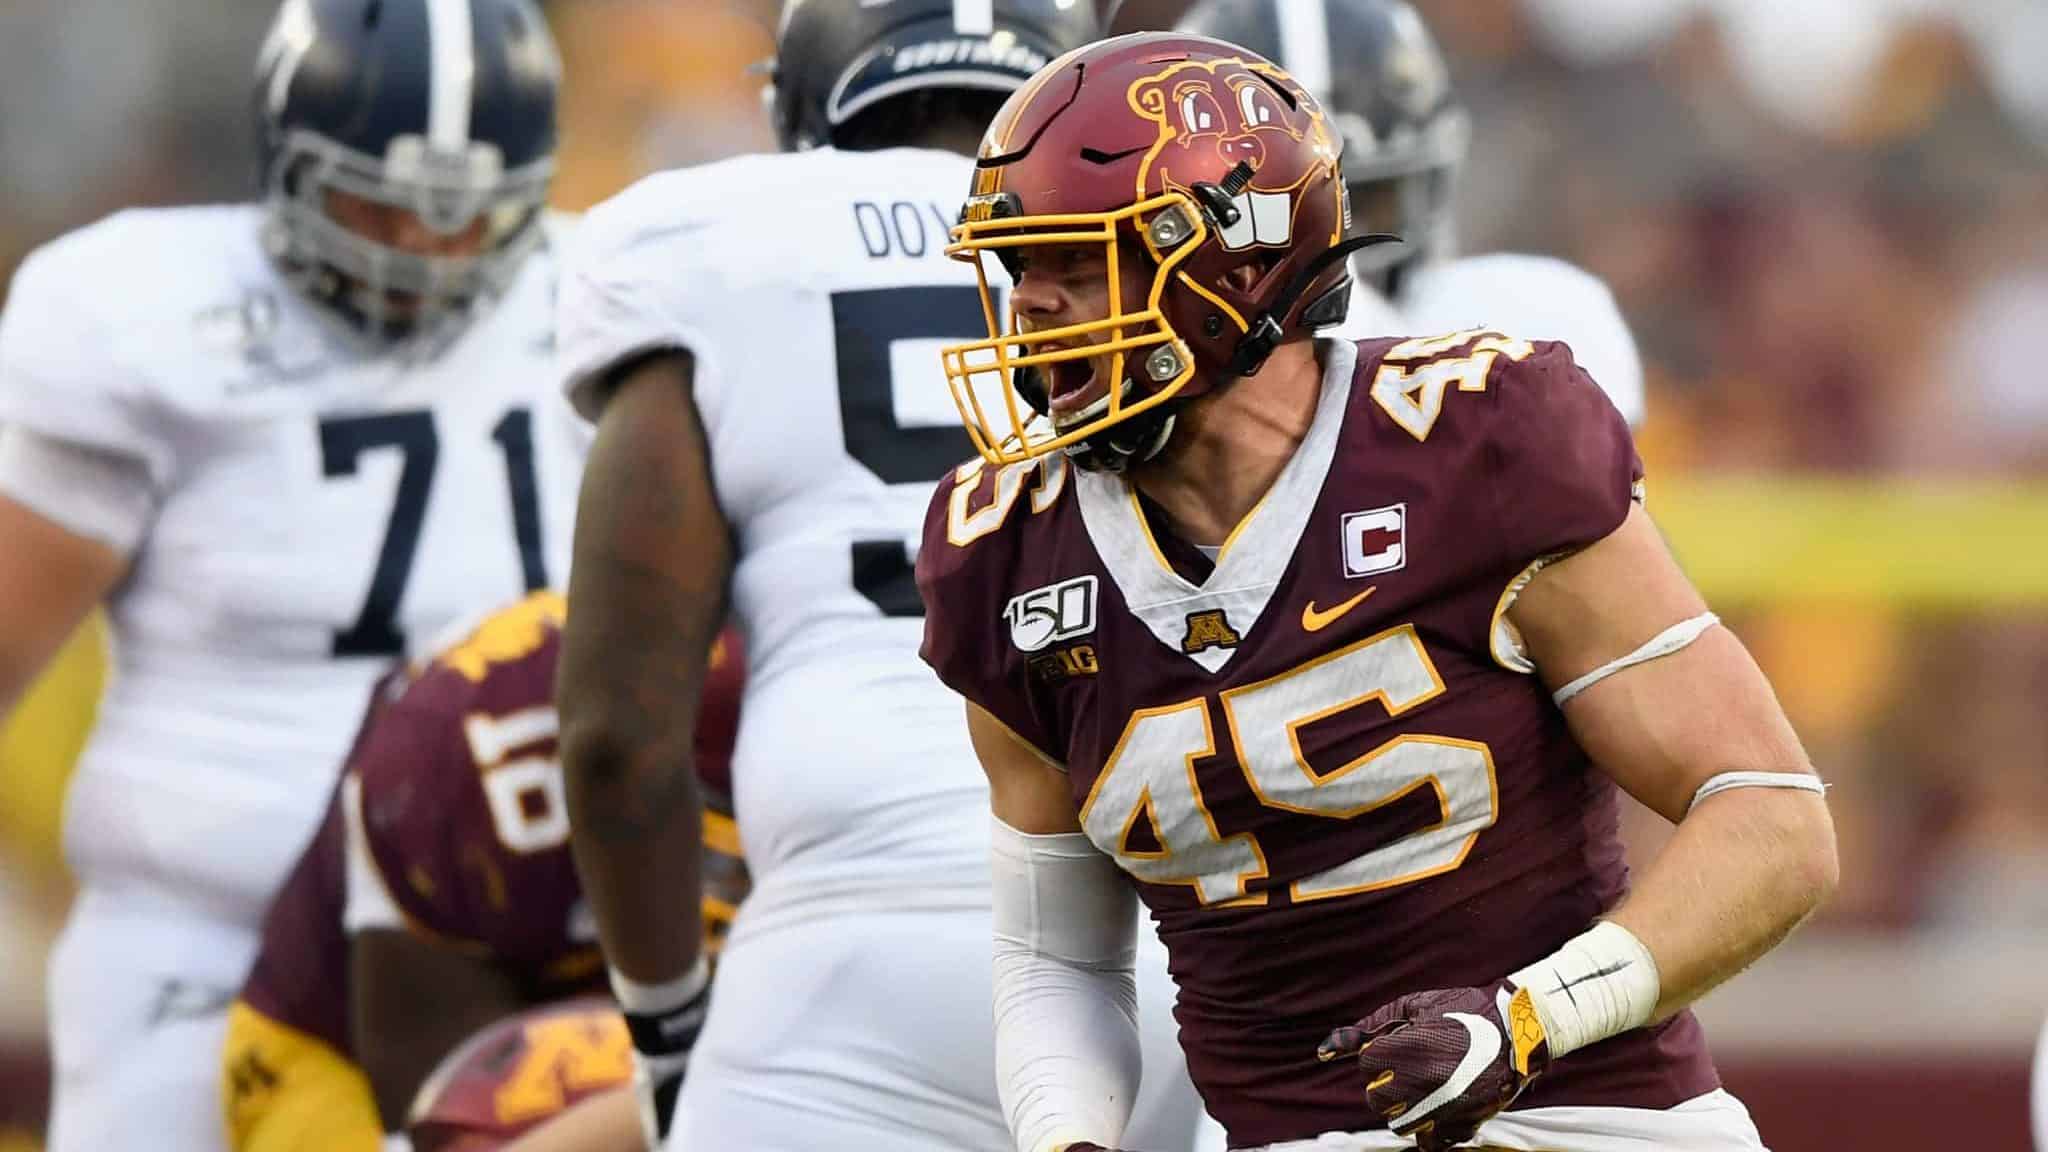 MINNEAPOLIS, MINNESOTA - SEPTEMBER 14: Carter Coughlin #45 of the Minnesota Gophers celebrates forcing a fumble by the Georgia Southern Eagles during the fourth quarter of the game at TCF Bank Stadium on September 14, 2019 in Minneapolis, Minnesota. The Gophers defeated the Eagles 35-32.